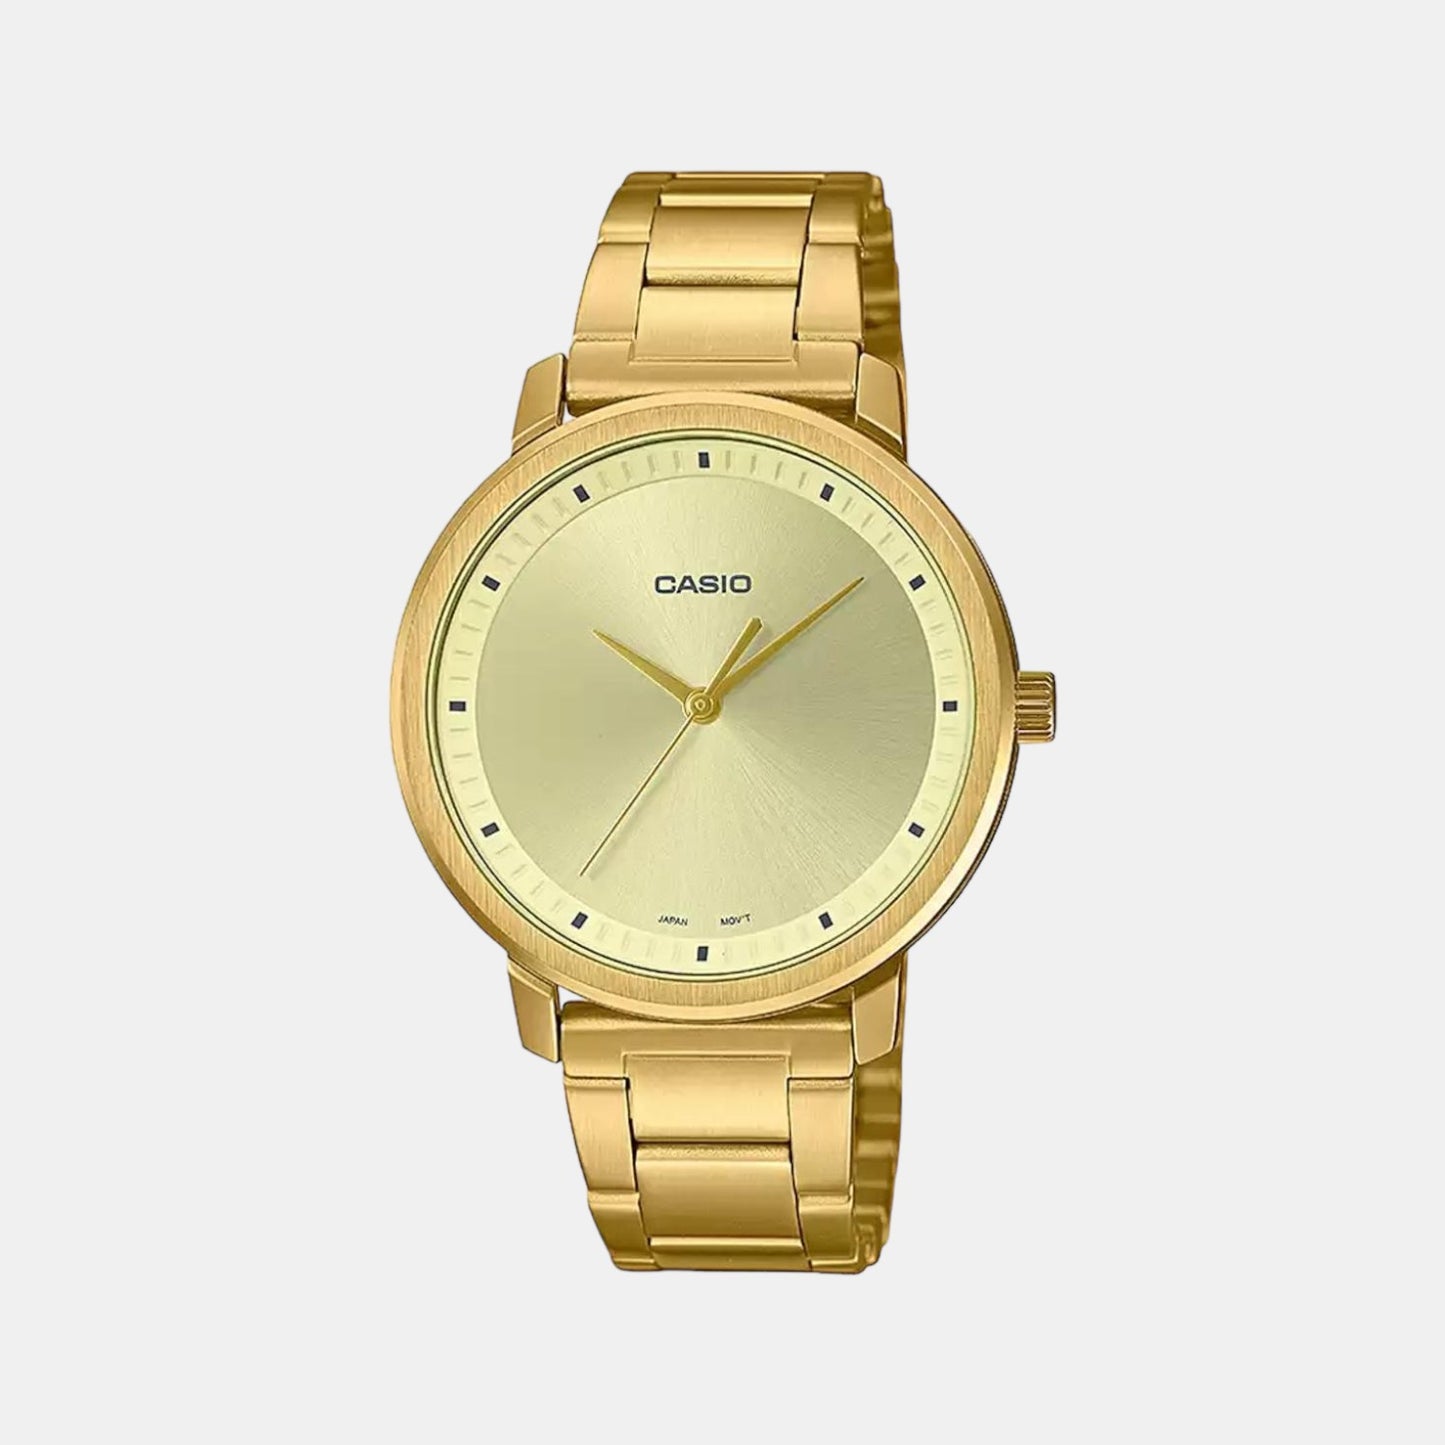 casio-stainless-steel-gold-analog-women-watch-a1940